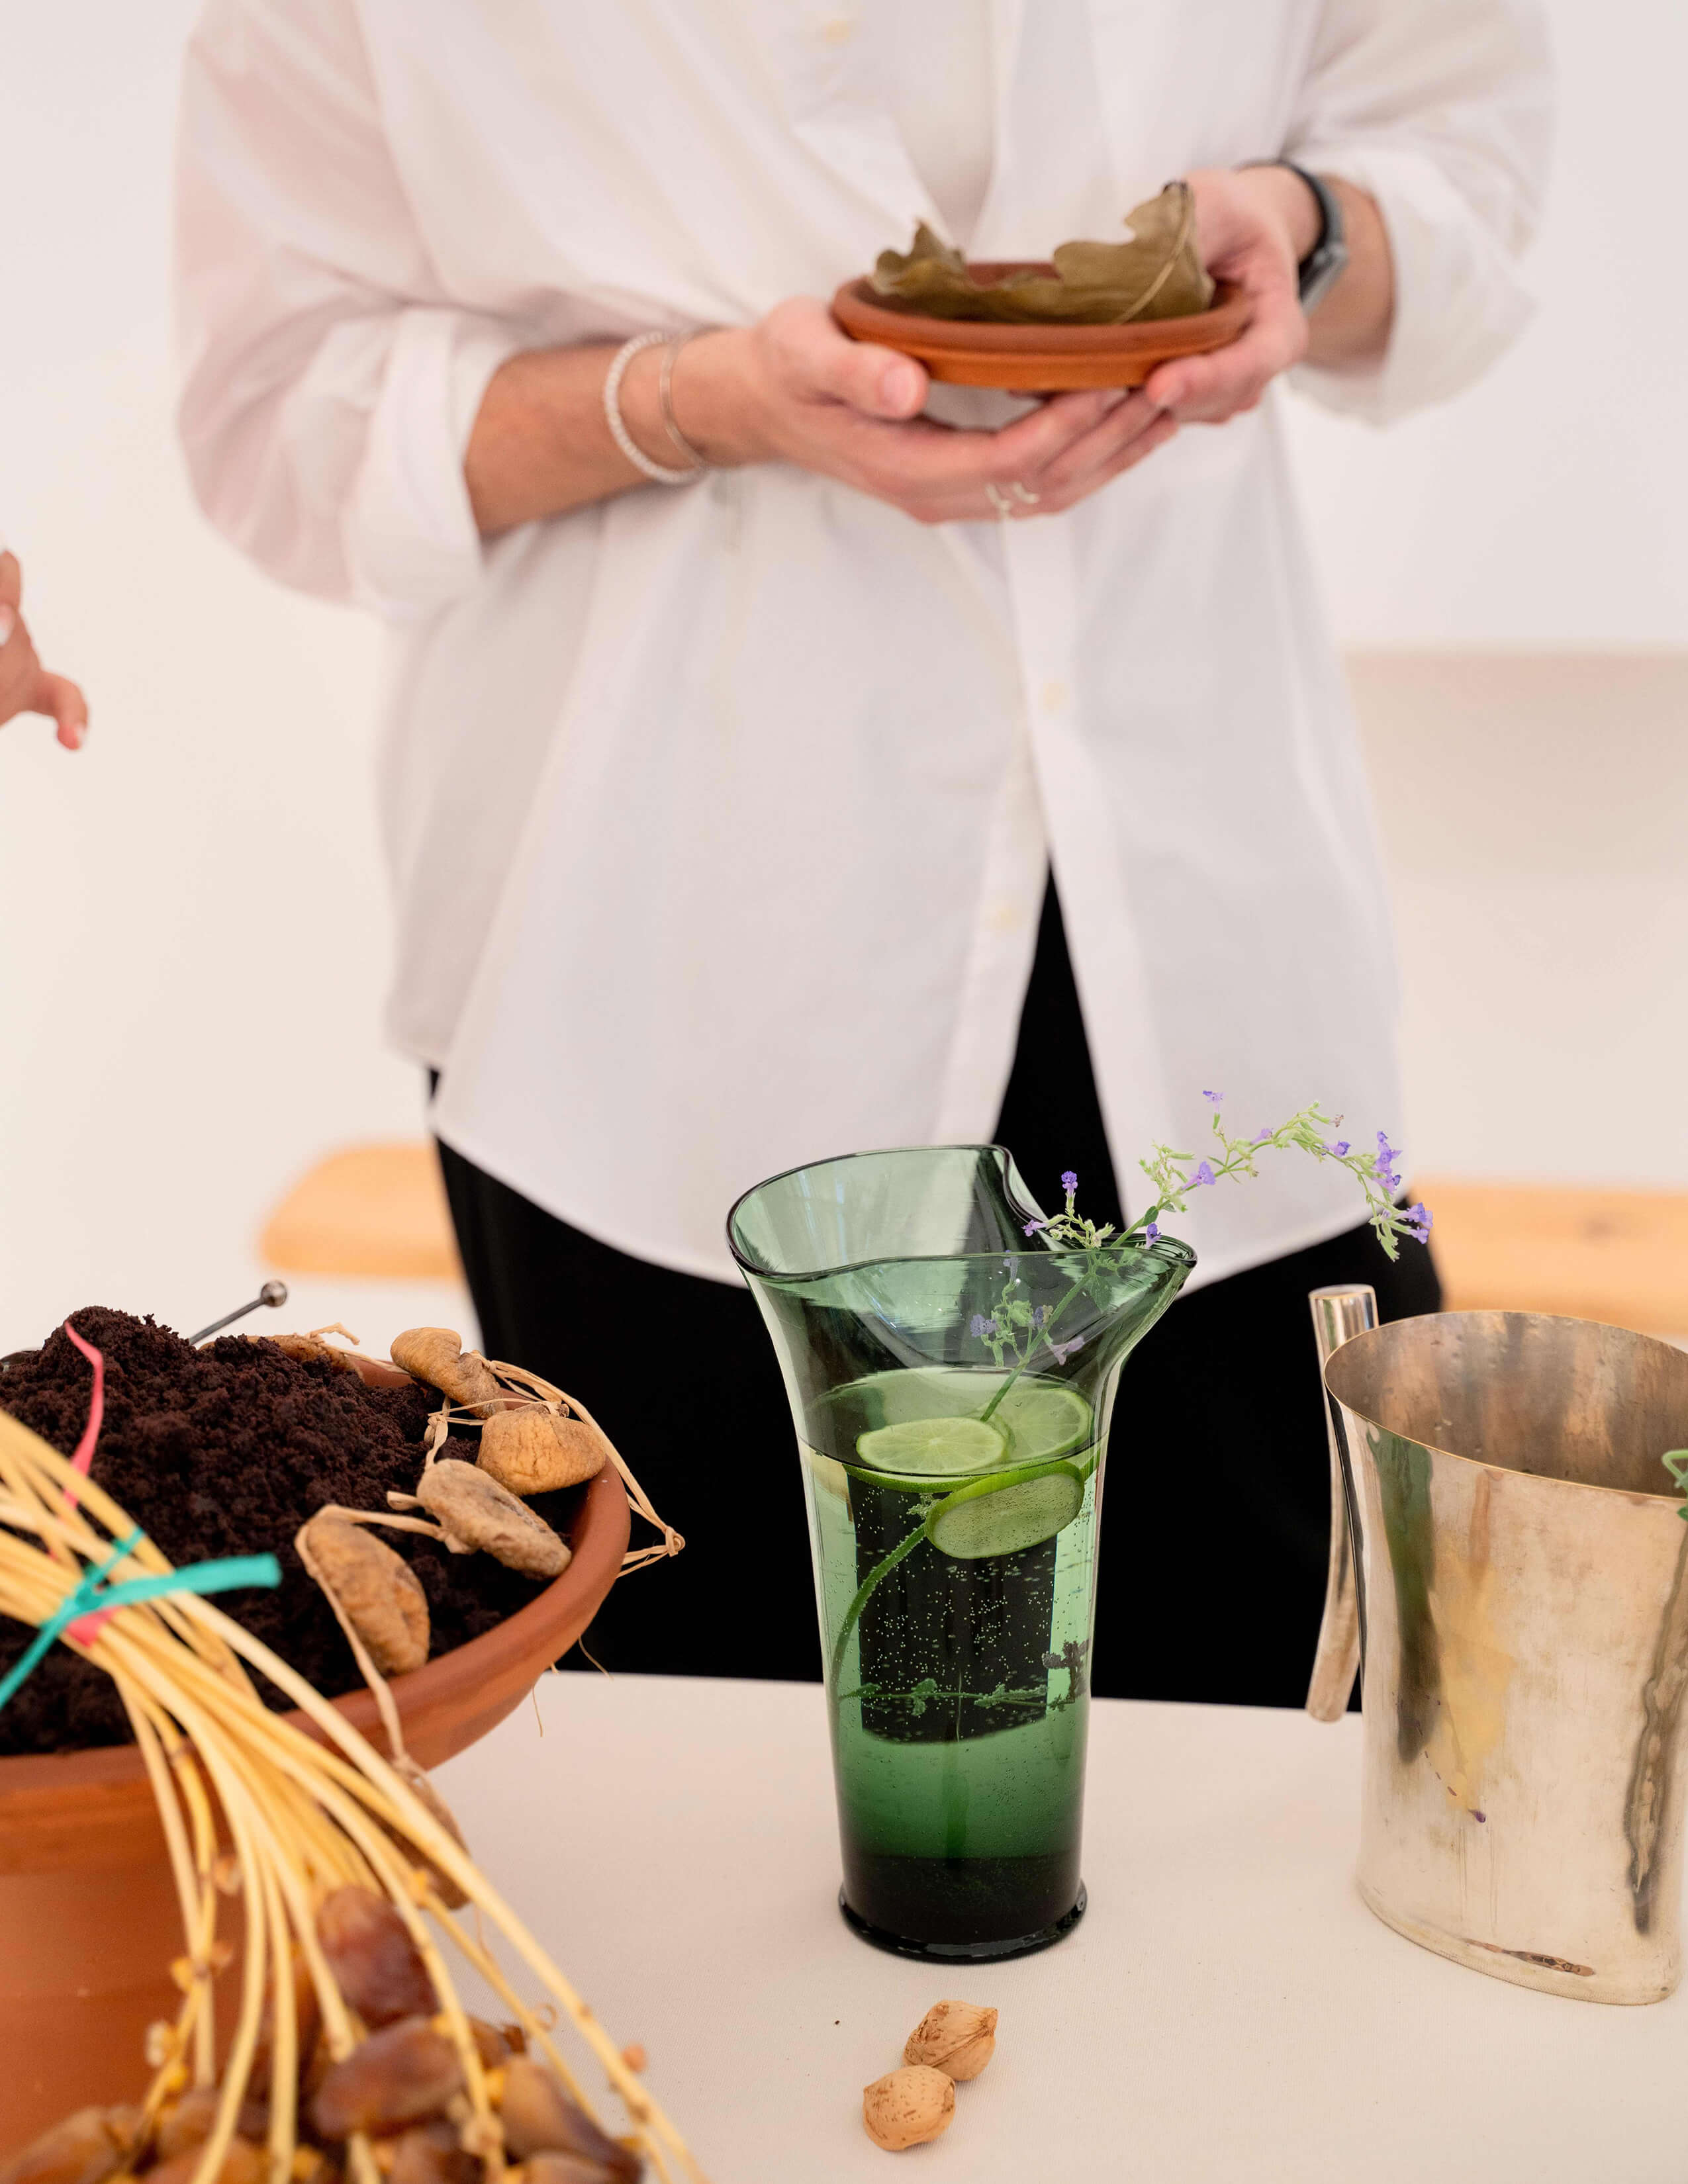 A person stood behind a green glass of drink that contained 3 slices of lemon and a few stems of flowers in it. There are two plant seeds, a bowl of soil with mushrooms and a jug on the table.